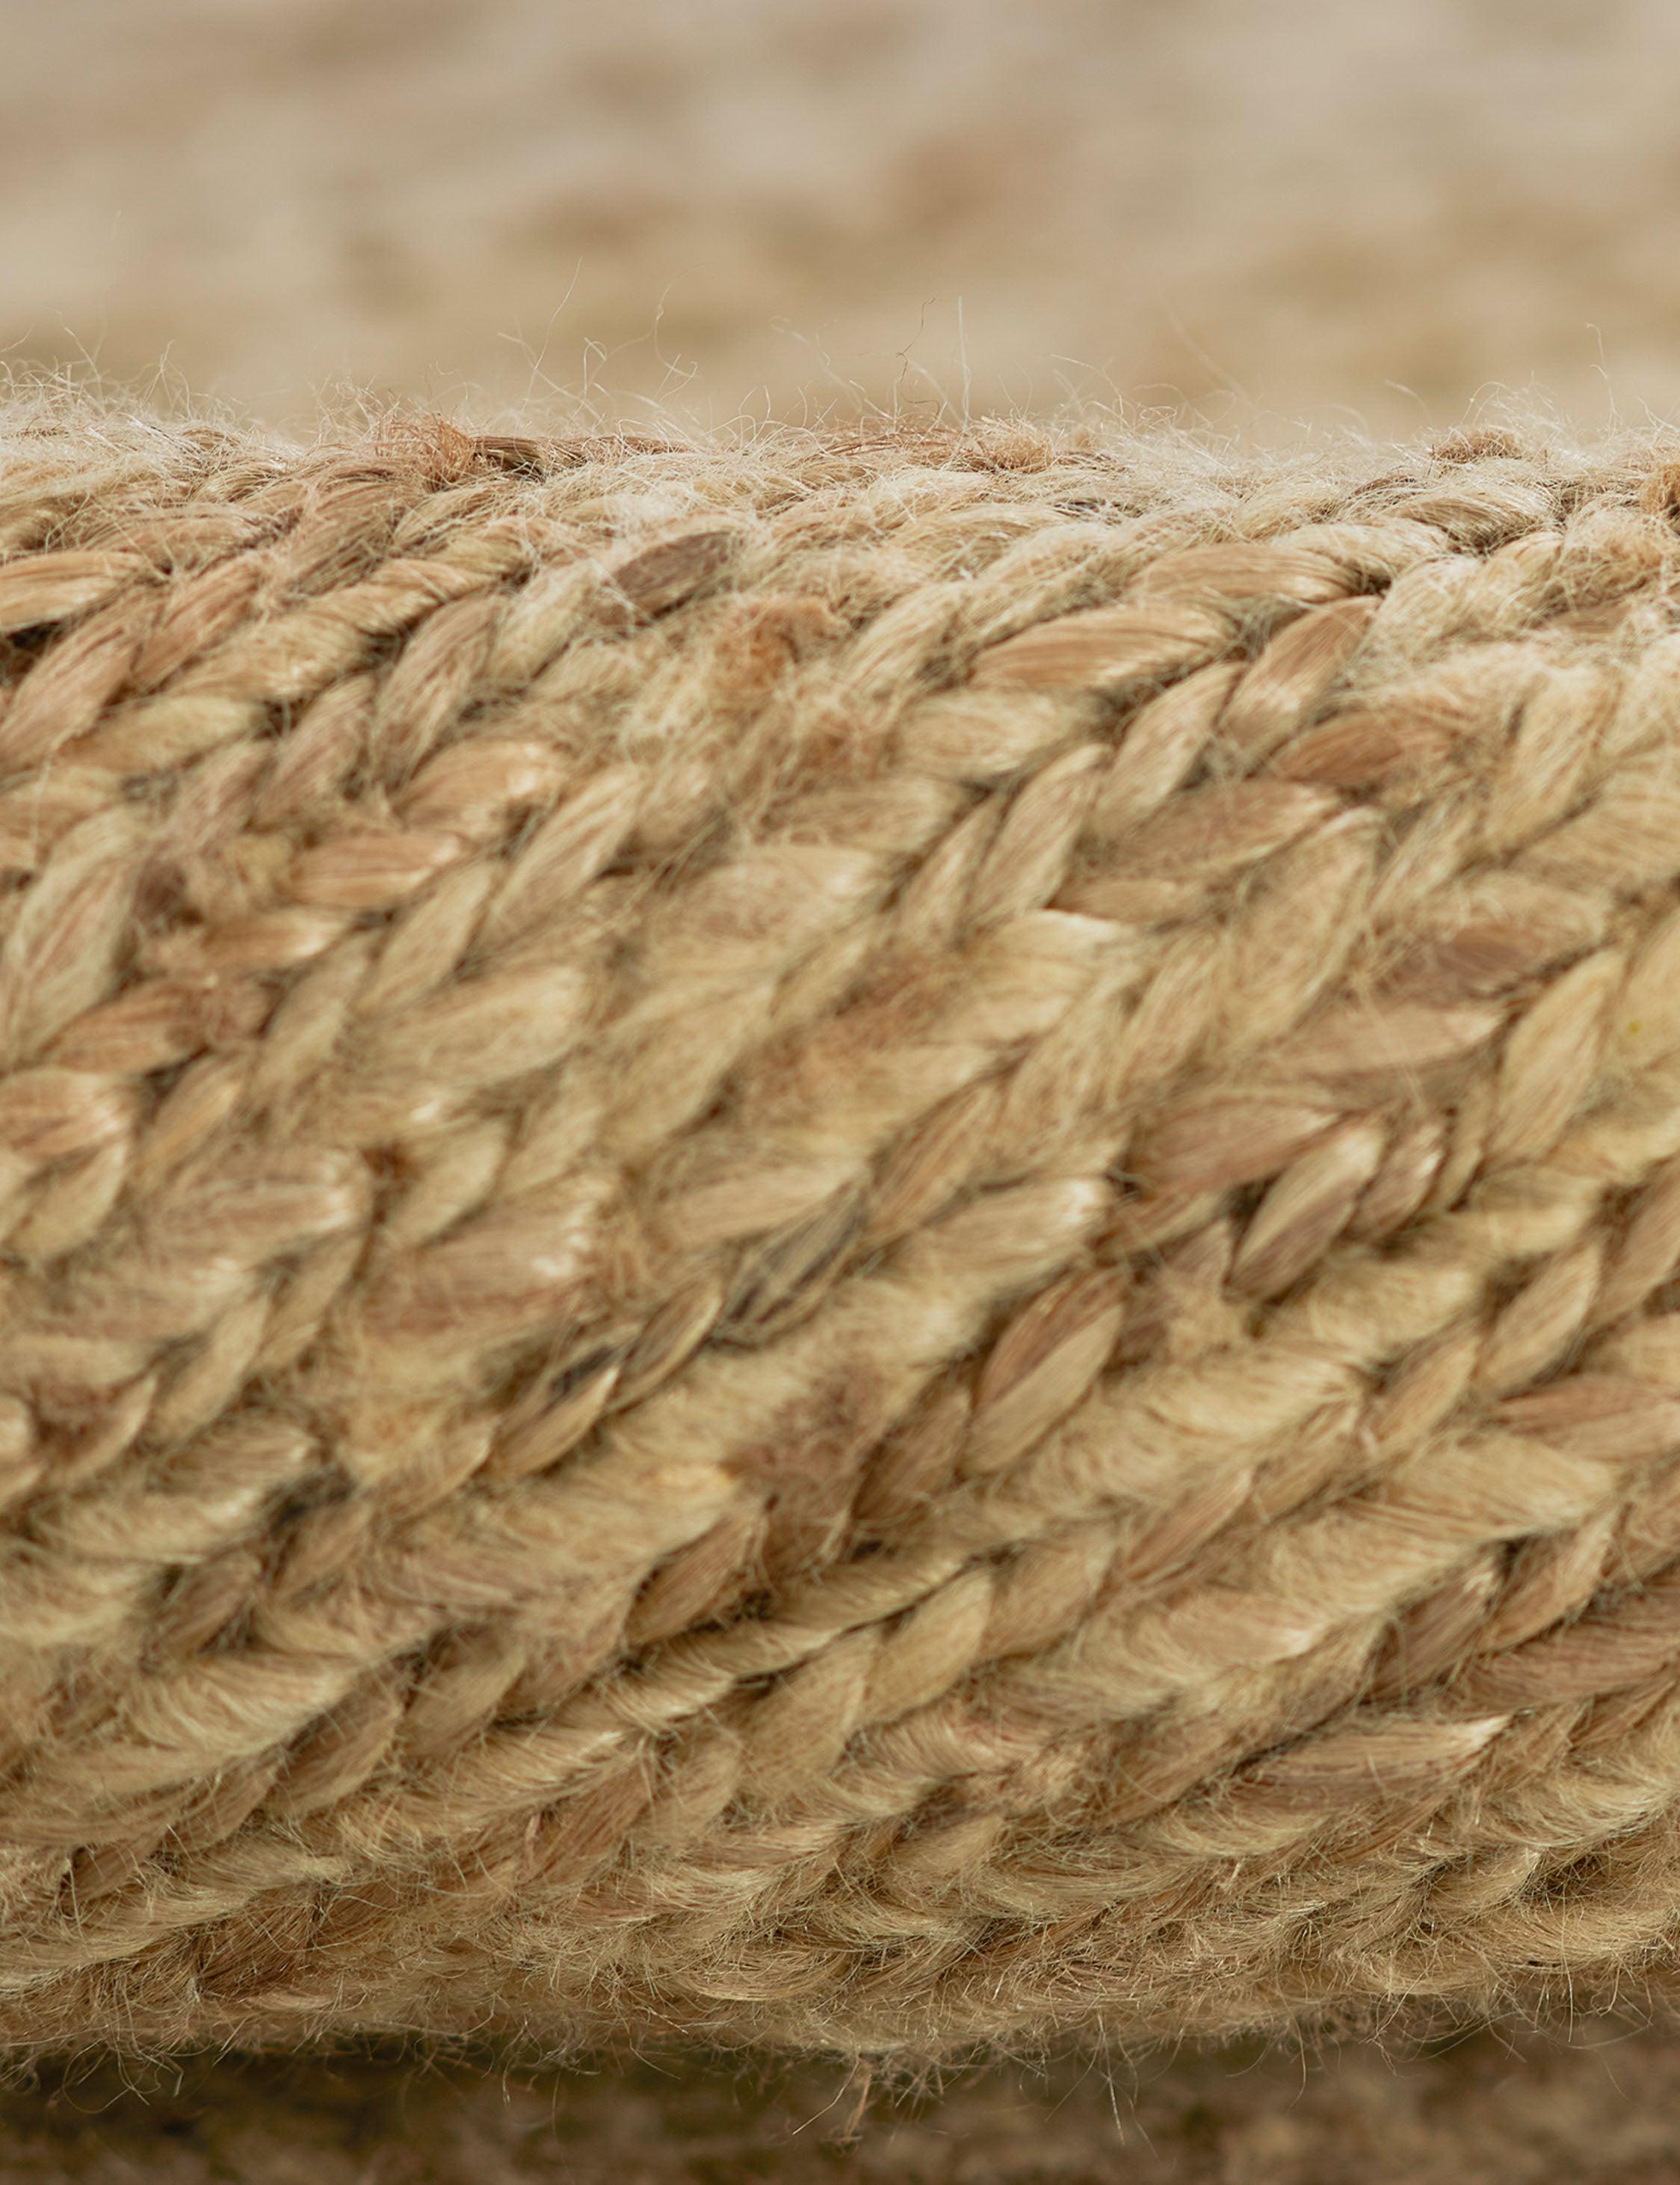 Torquay 5' x 8' Handwoven Jute and Wool Round Rug - Natural